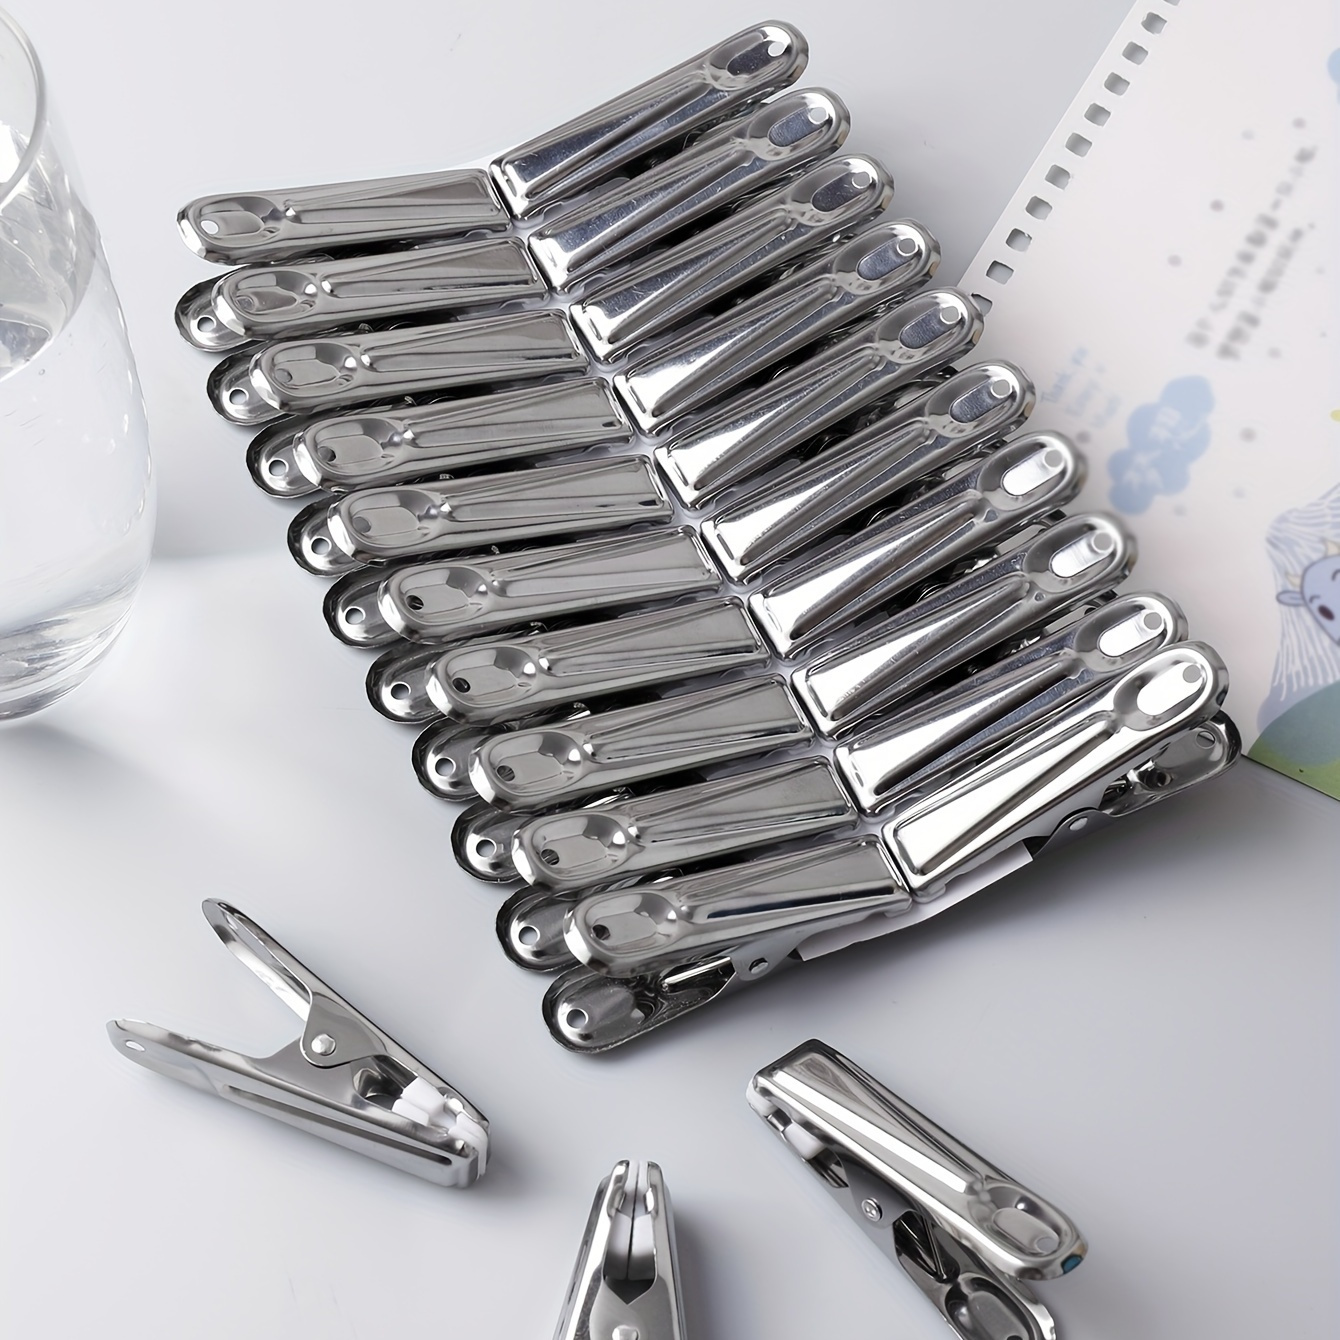 

20pcs Durable Stainless Steel Clothes Pins - Windproof And Easy To Use For Household And Clothing Storage